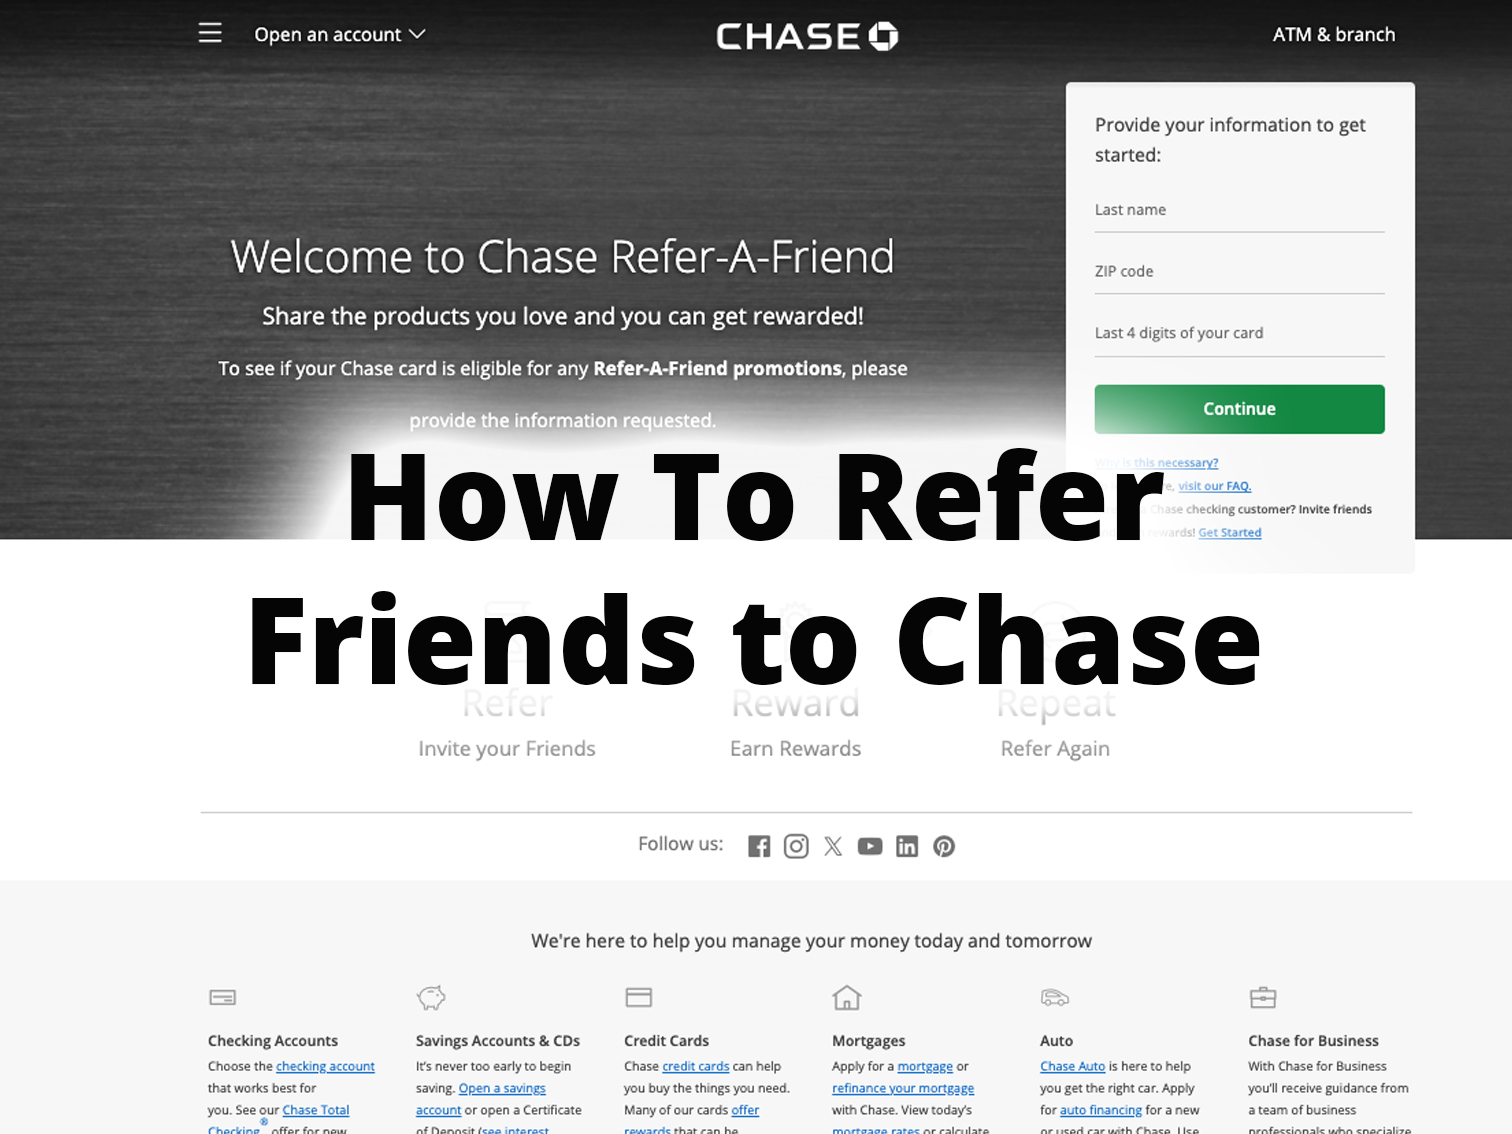 How To Refer Friends to Chase